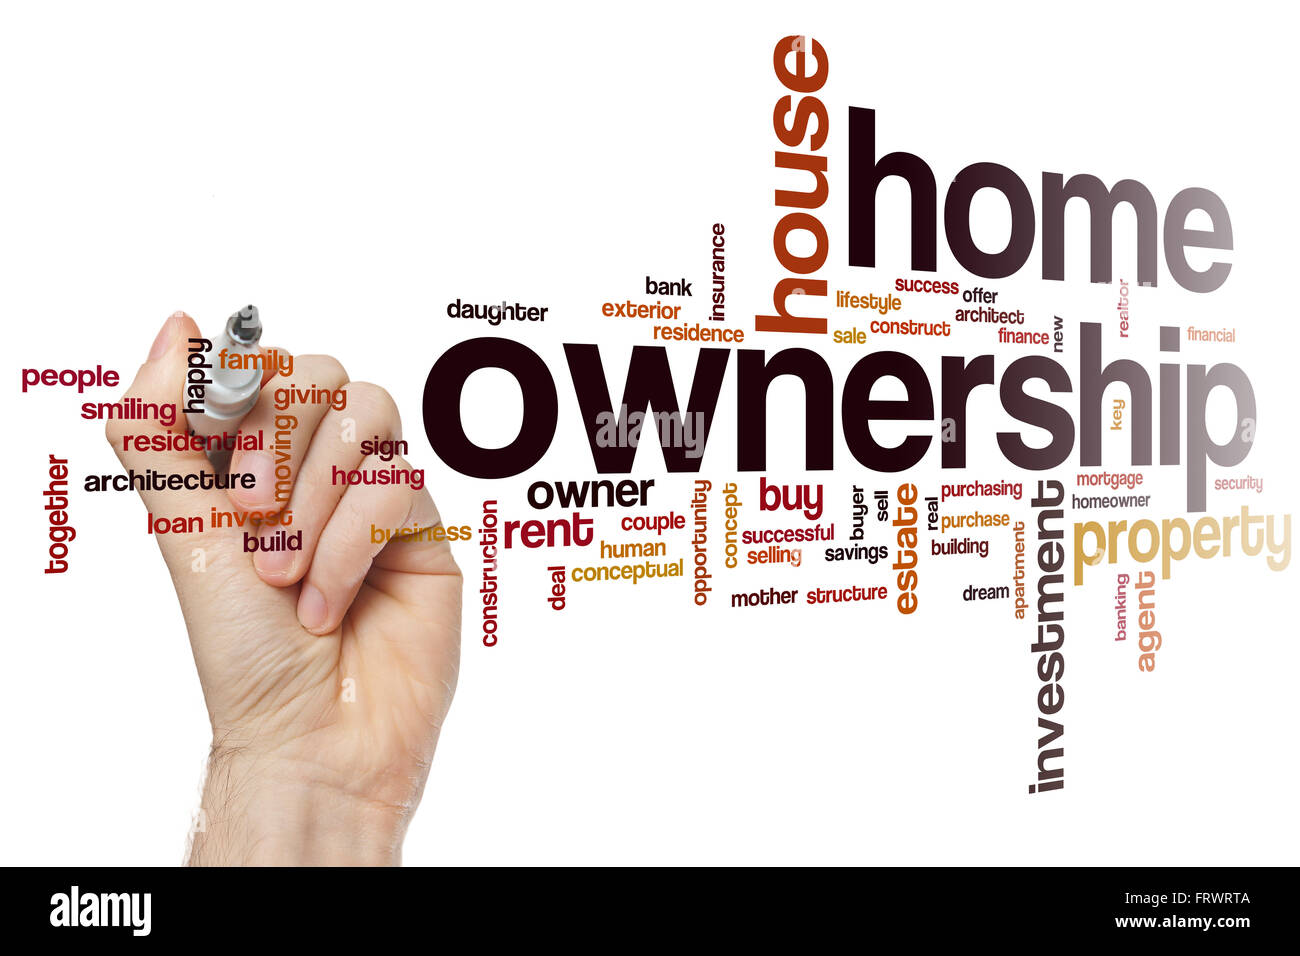 Home ownership word cloud concept Stock Photo